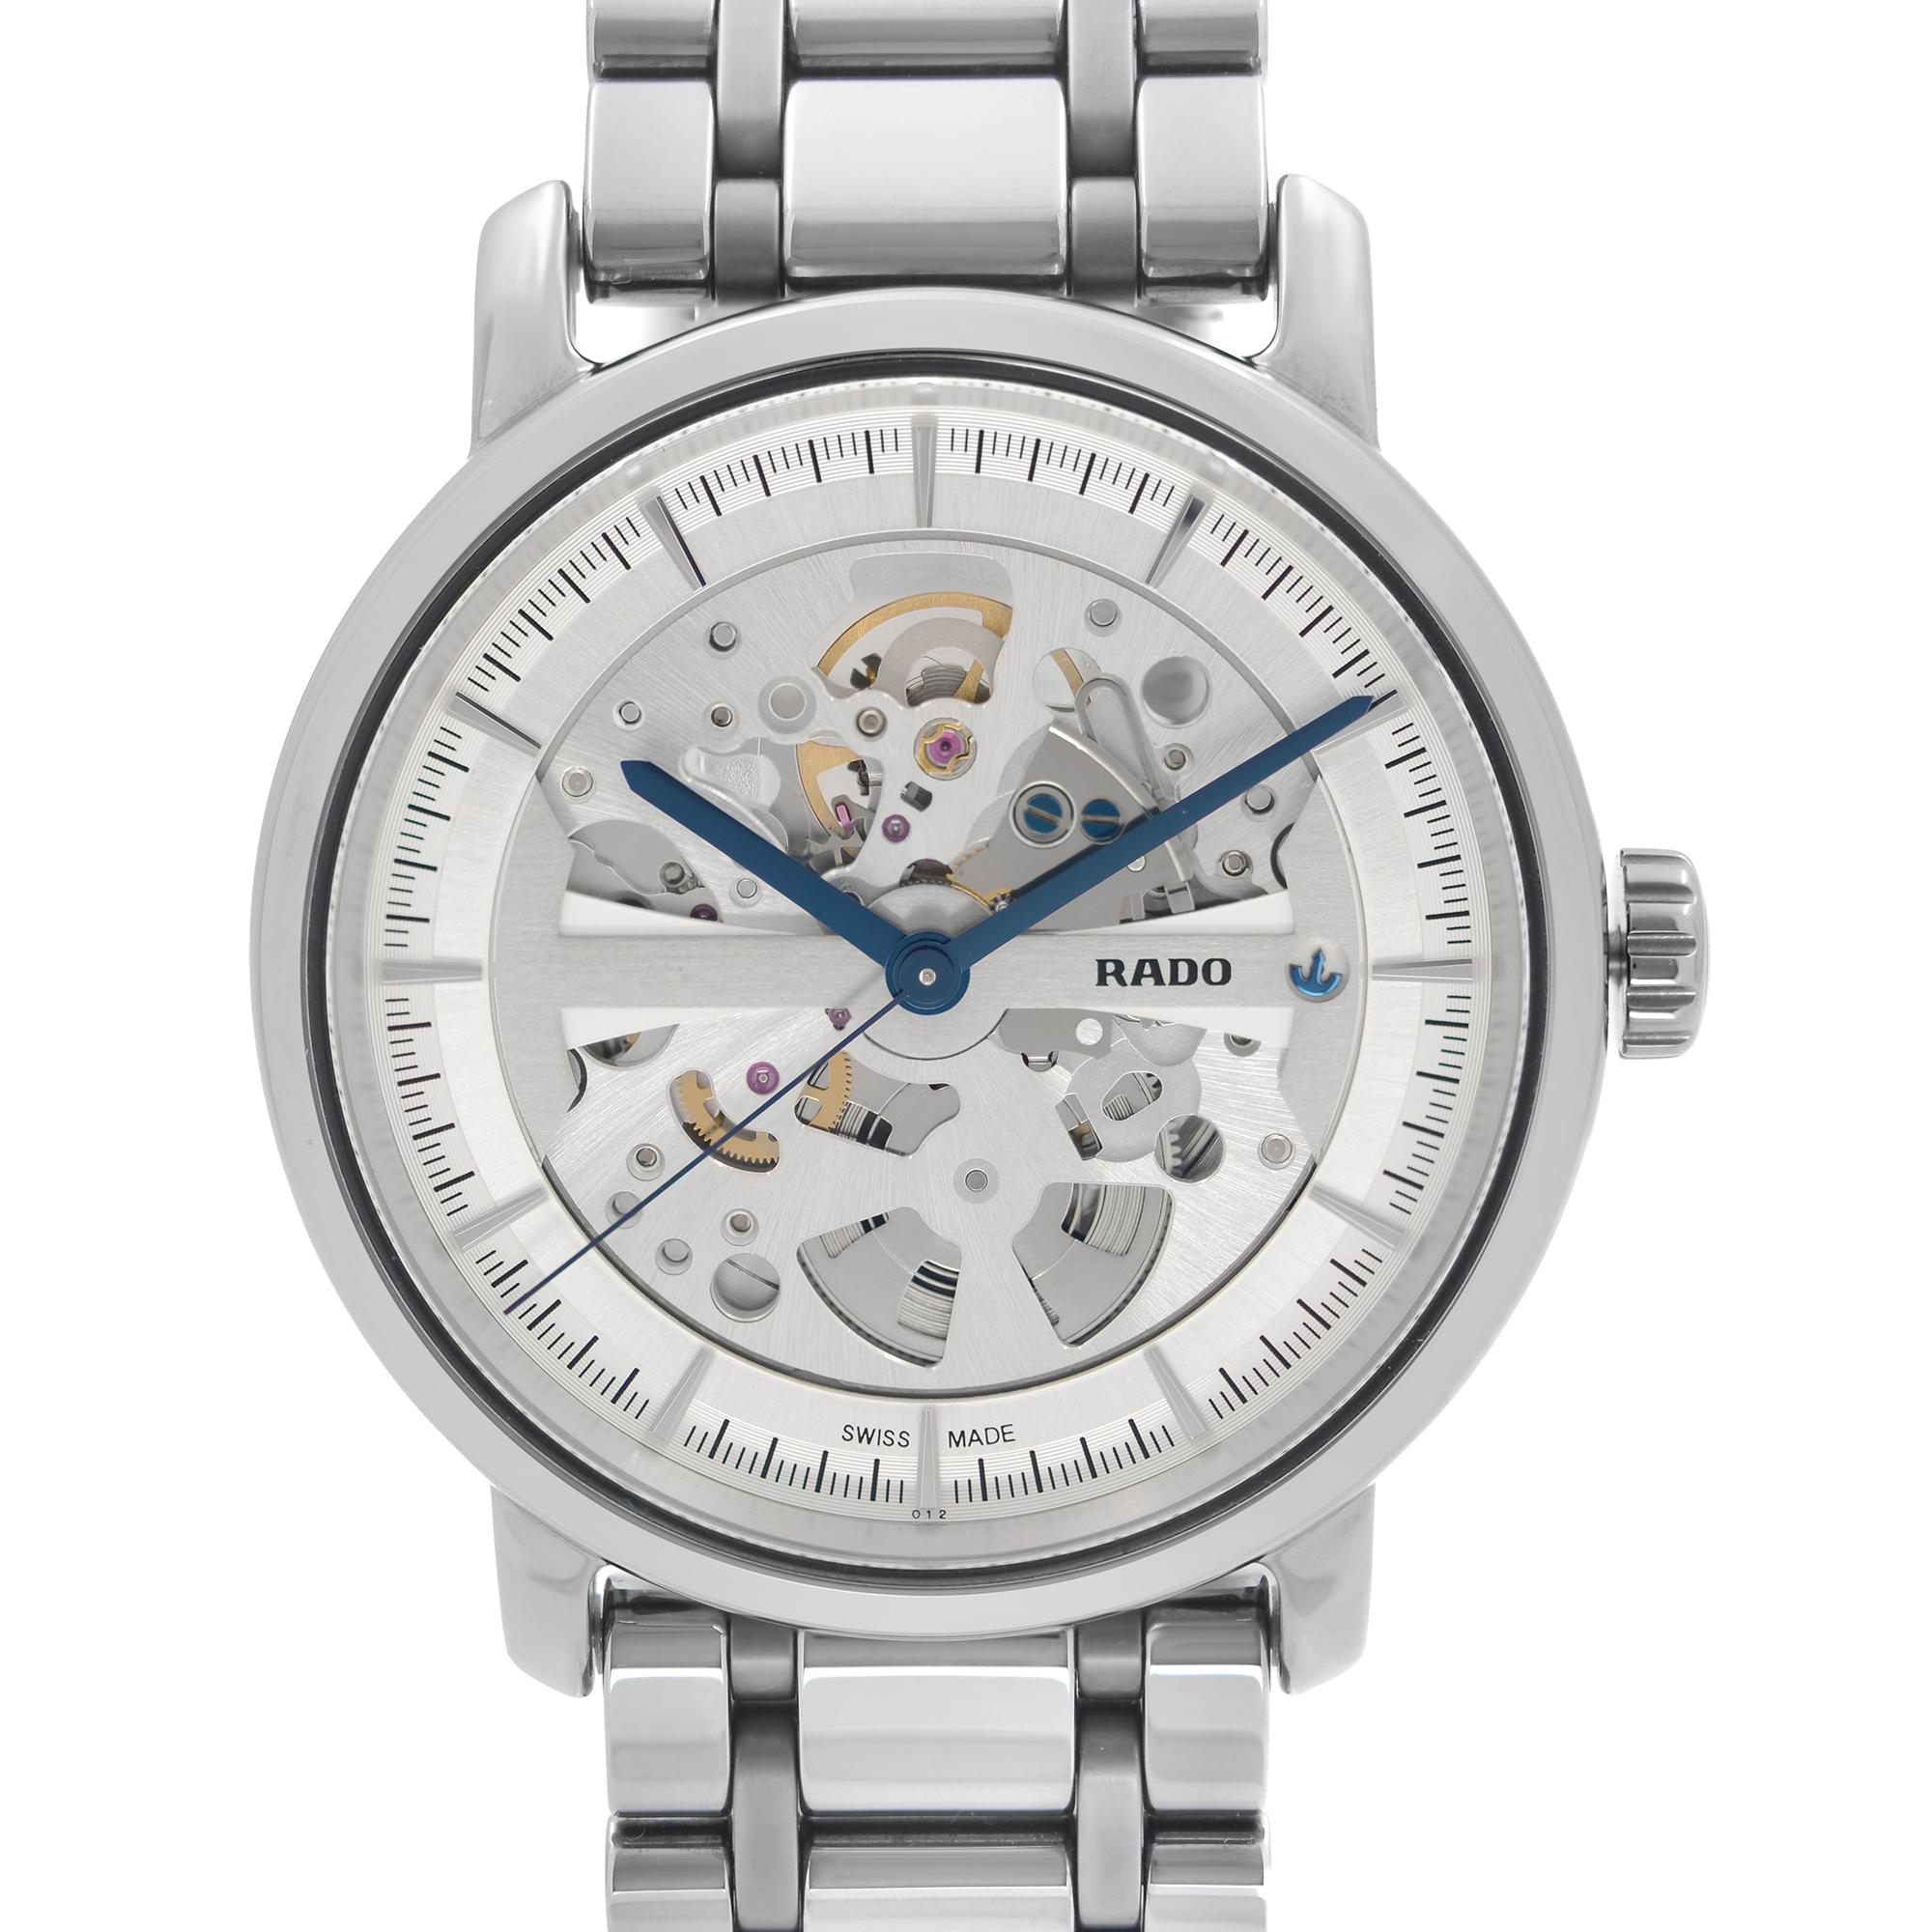 Display Model Rado Diamaster XL Ceramic Gray Skeleton Dial Automatic Men's Watch R14132122. This Beautiful Timepiece is Powered by Mechanical (Automatic) Movement and Features: Round High-Tech Ceramic & Bracelet Fixed High-Tech Ceramic Bezel, Grey